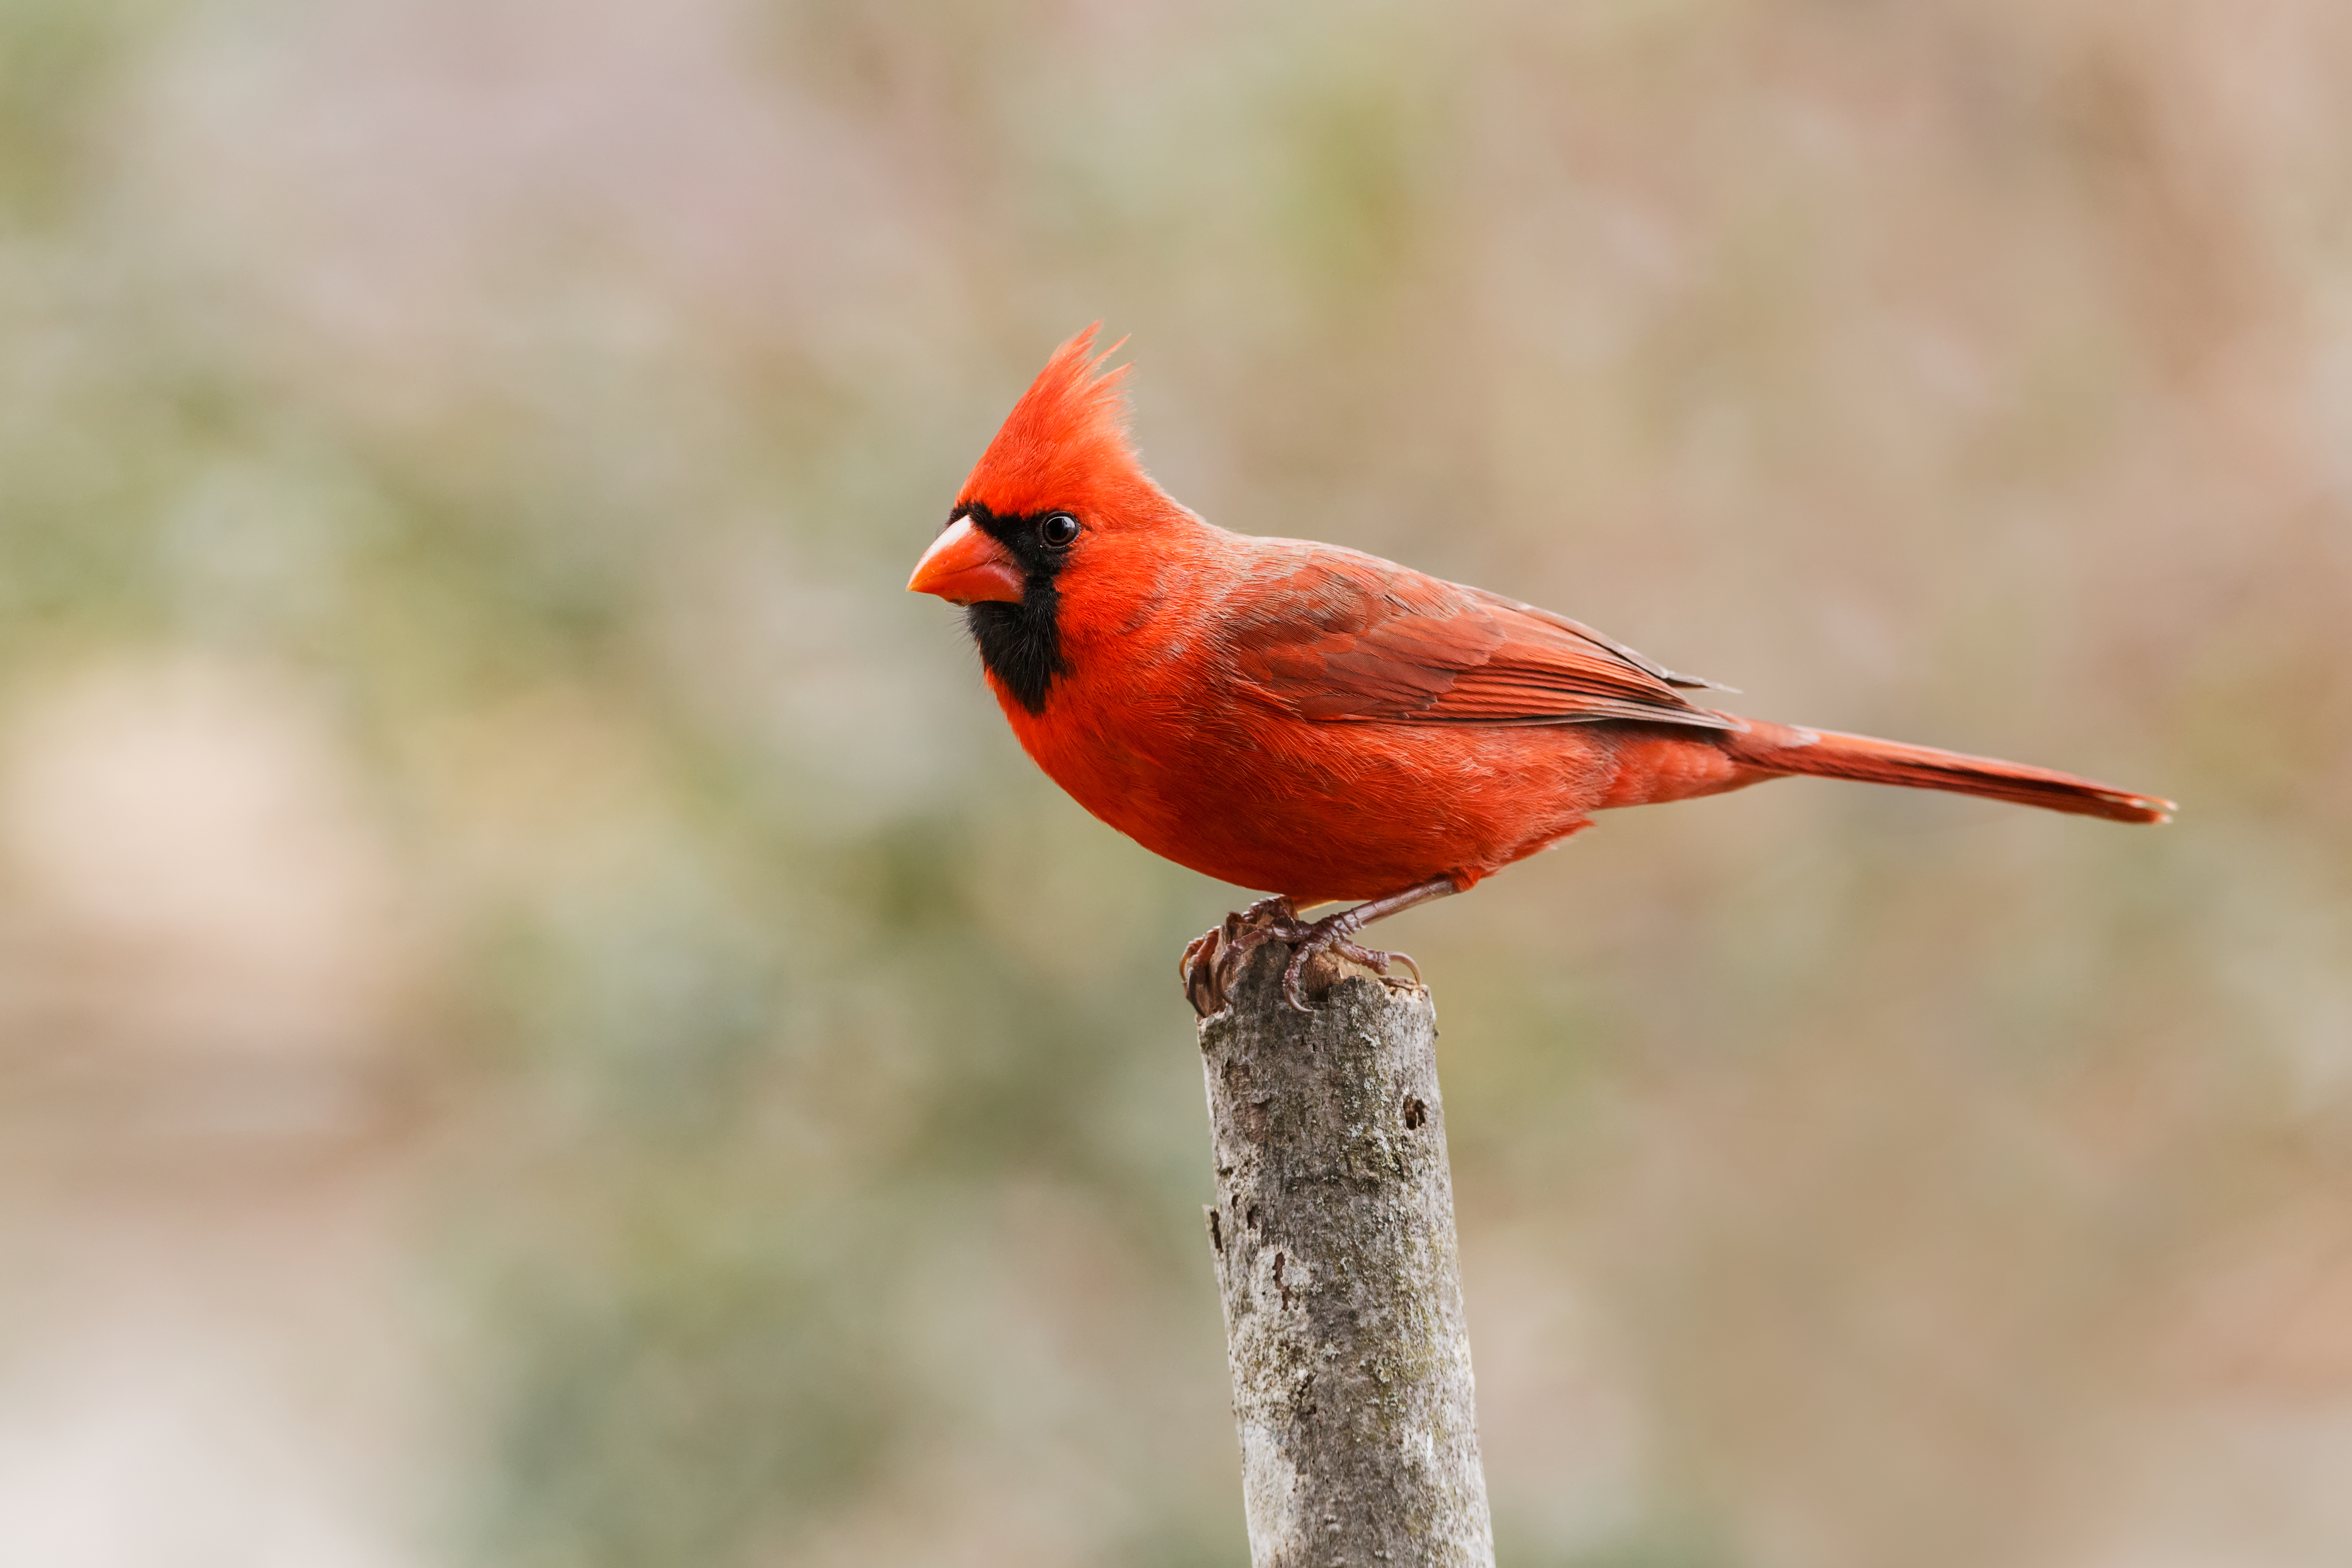 A bright red bird with black face and red beak standing on a stick